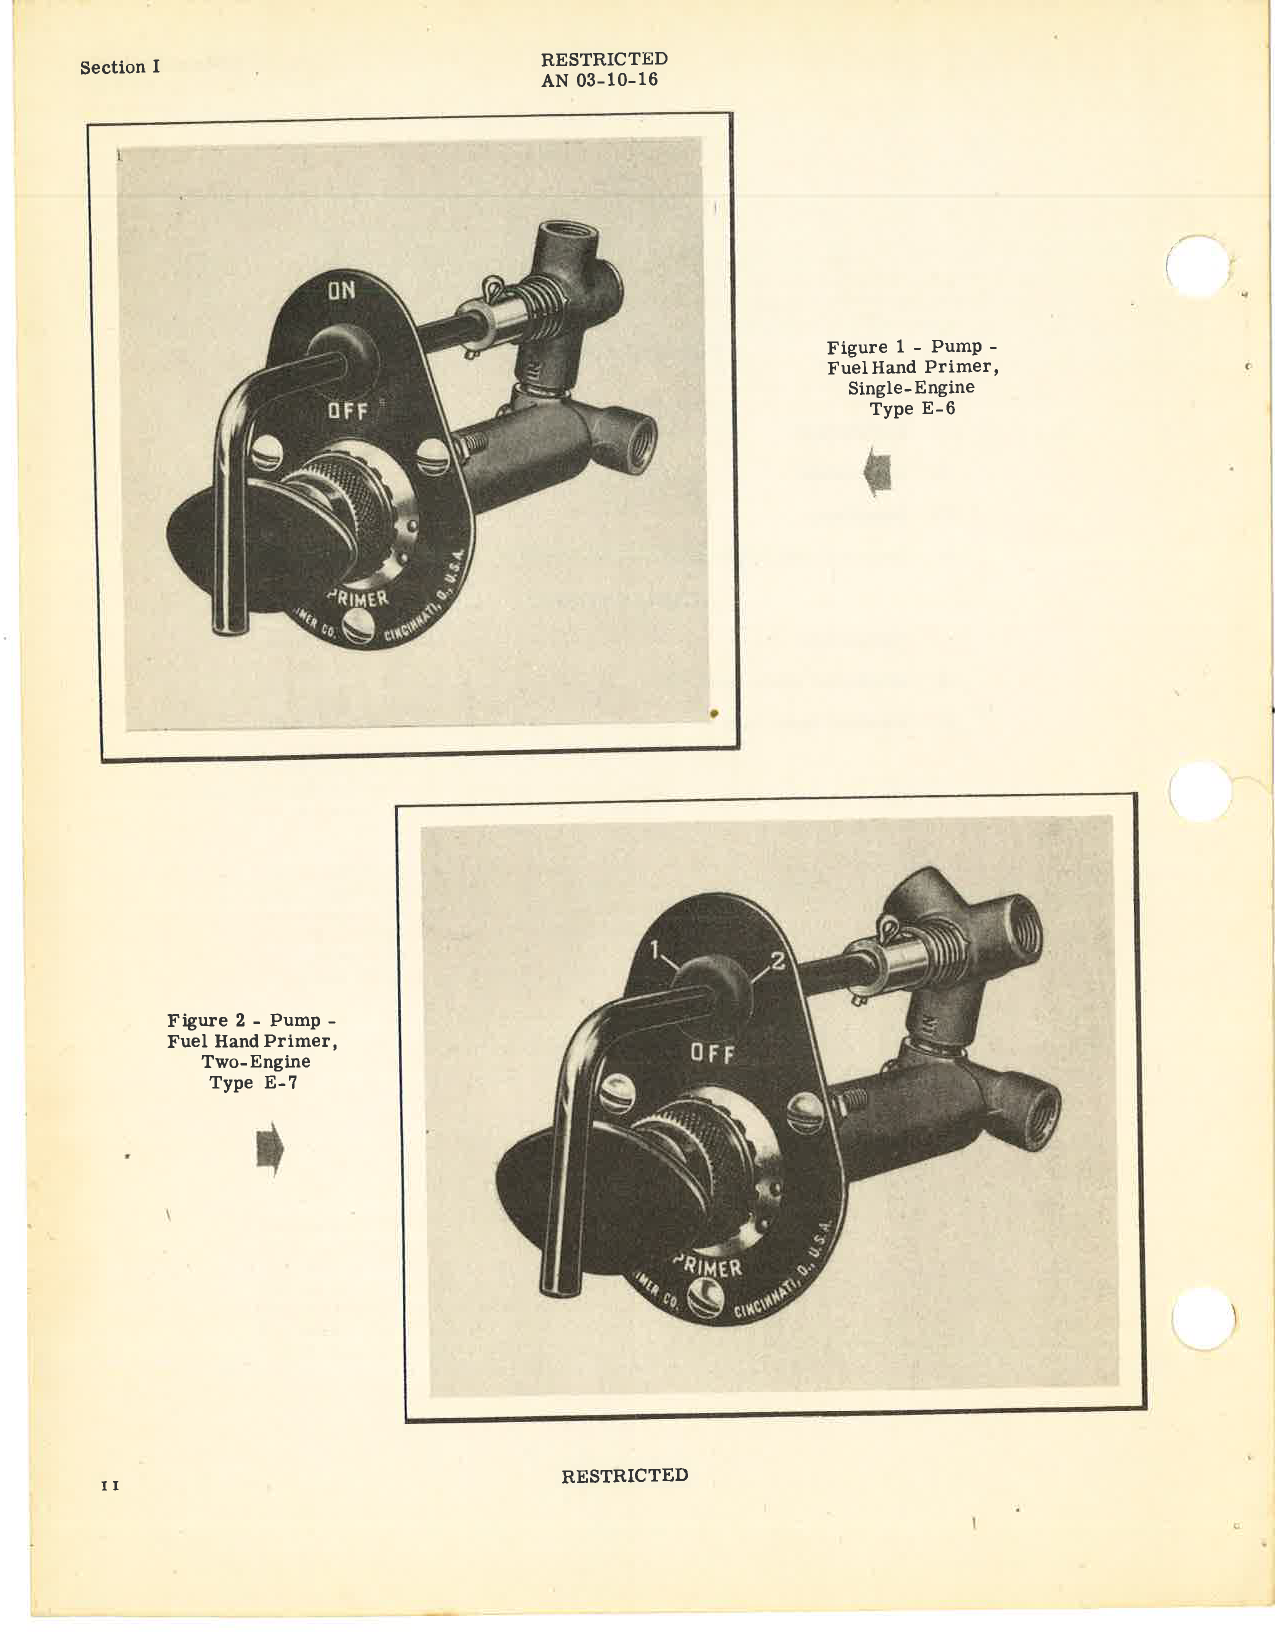 Sample page 6 from AirCorps Library document: Handbook of Instructions with Parts Catalog for Types E-6 and E-7 Hand Primer Fuel Pumps